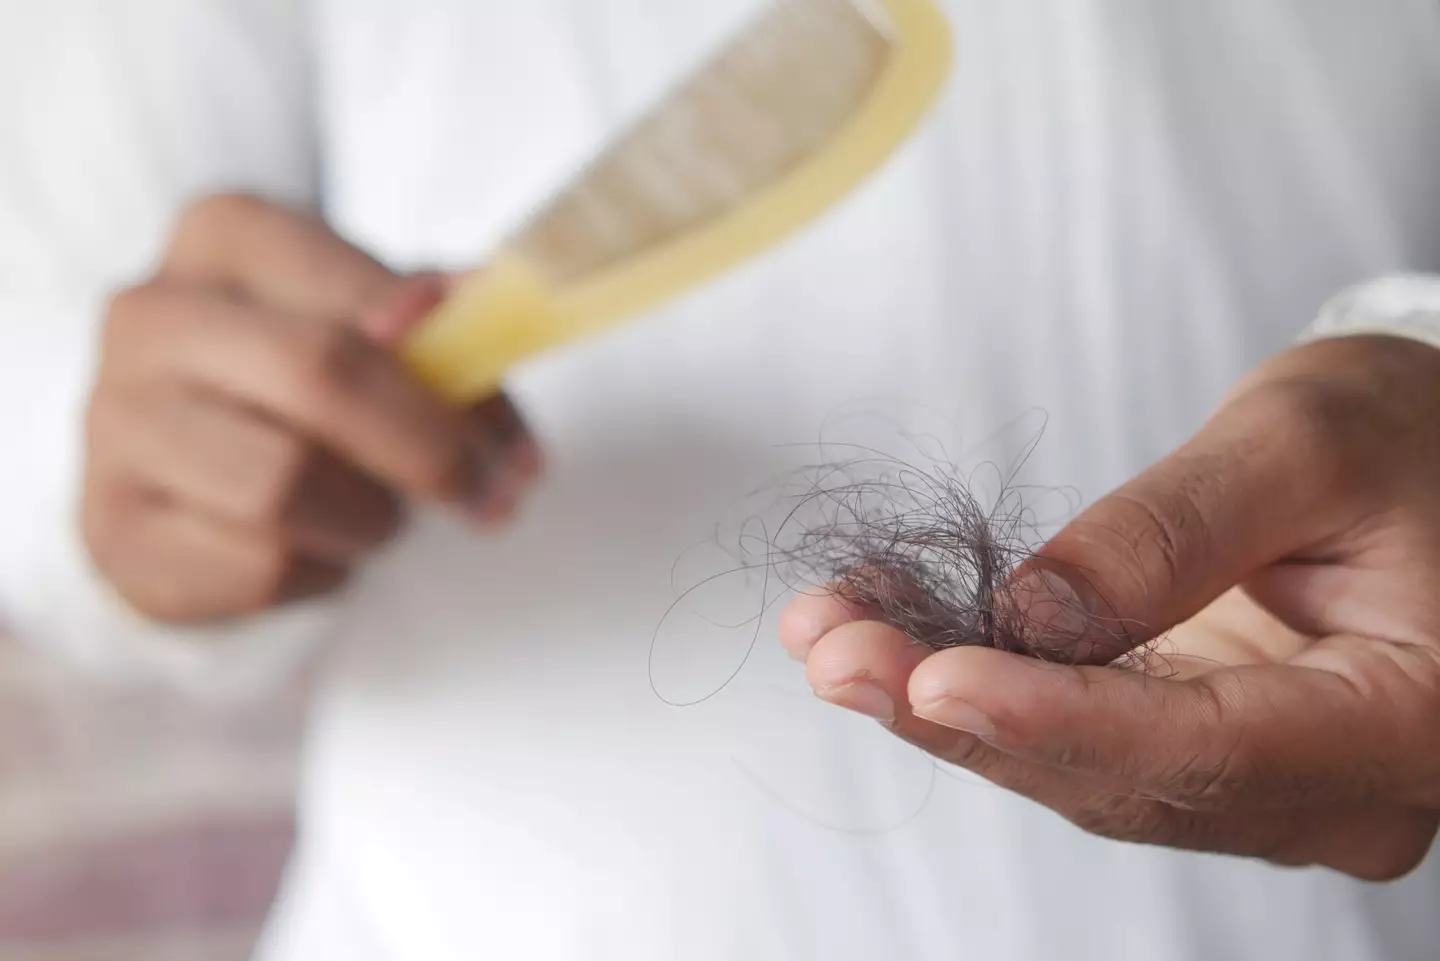 Alopecia Areta is caused by the body attacking its own healthy hair follicles.